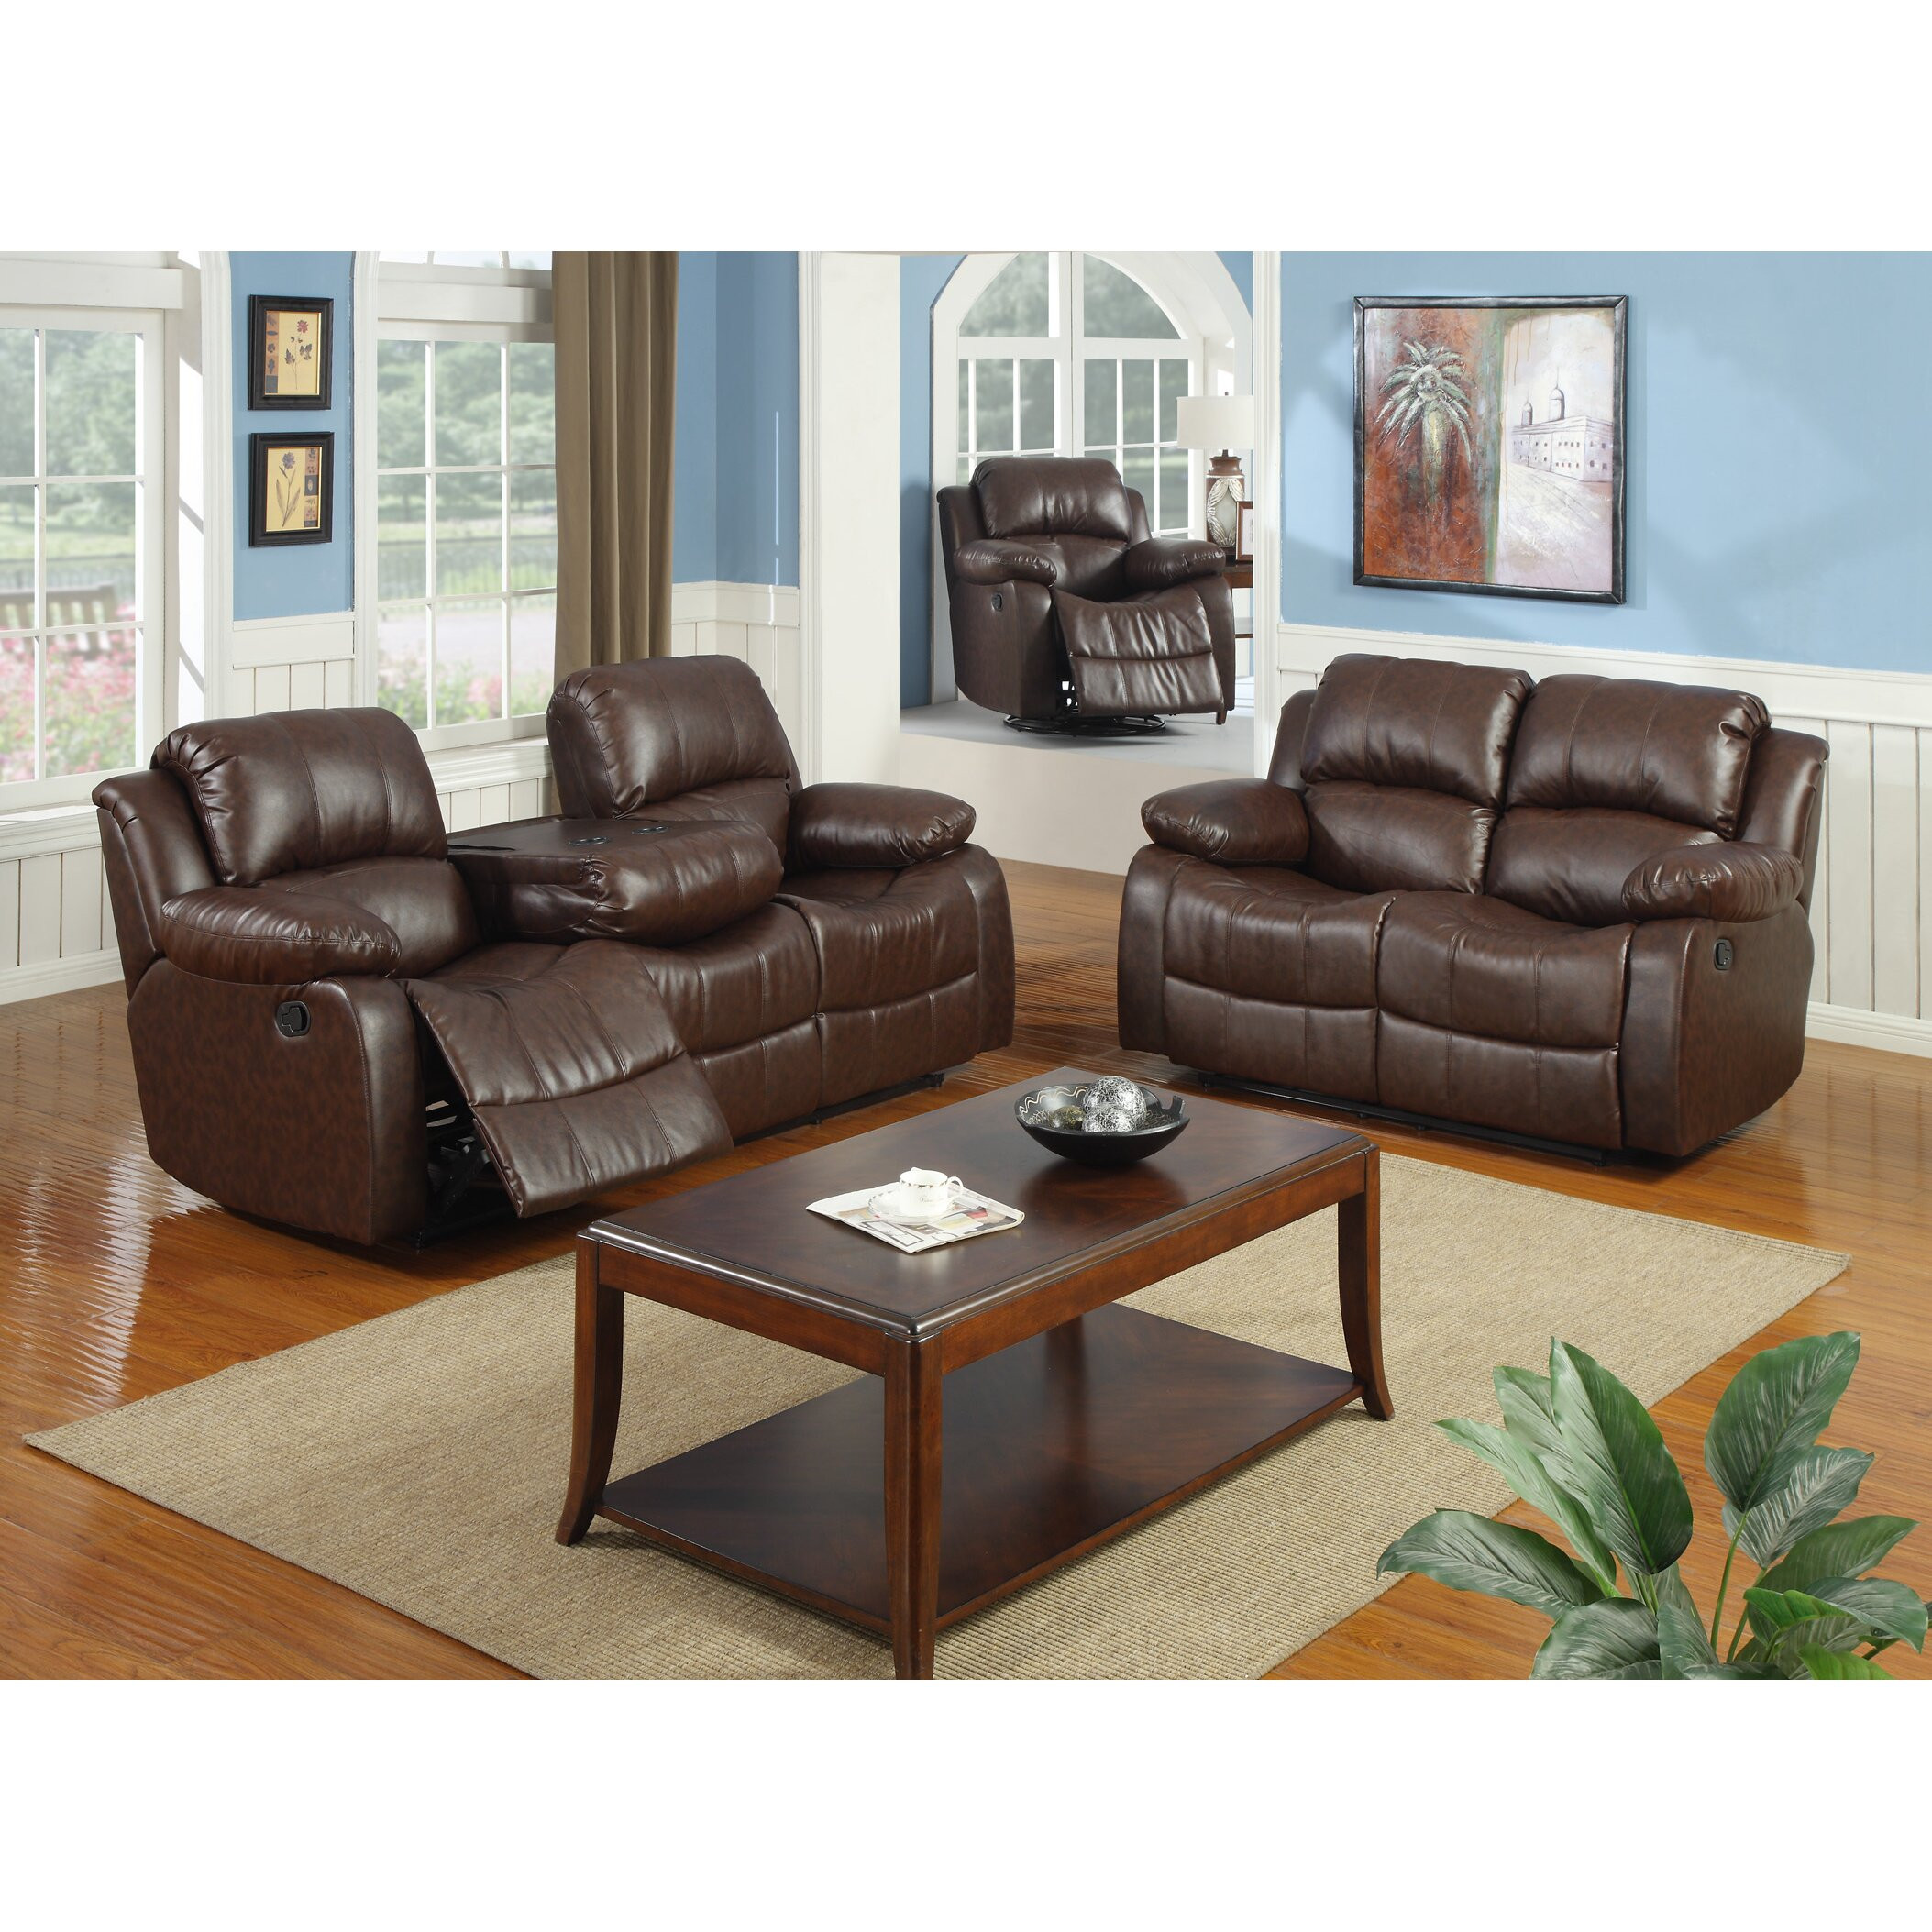 3 Piece Living Room Tables
 Best Quality Furniture Bonded Leather 3 Piece Recliner